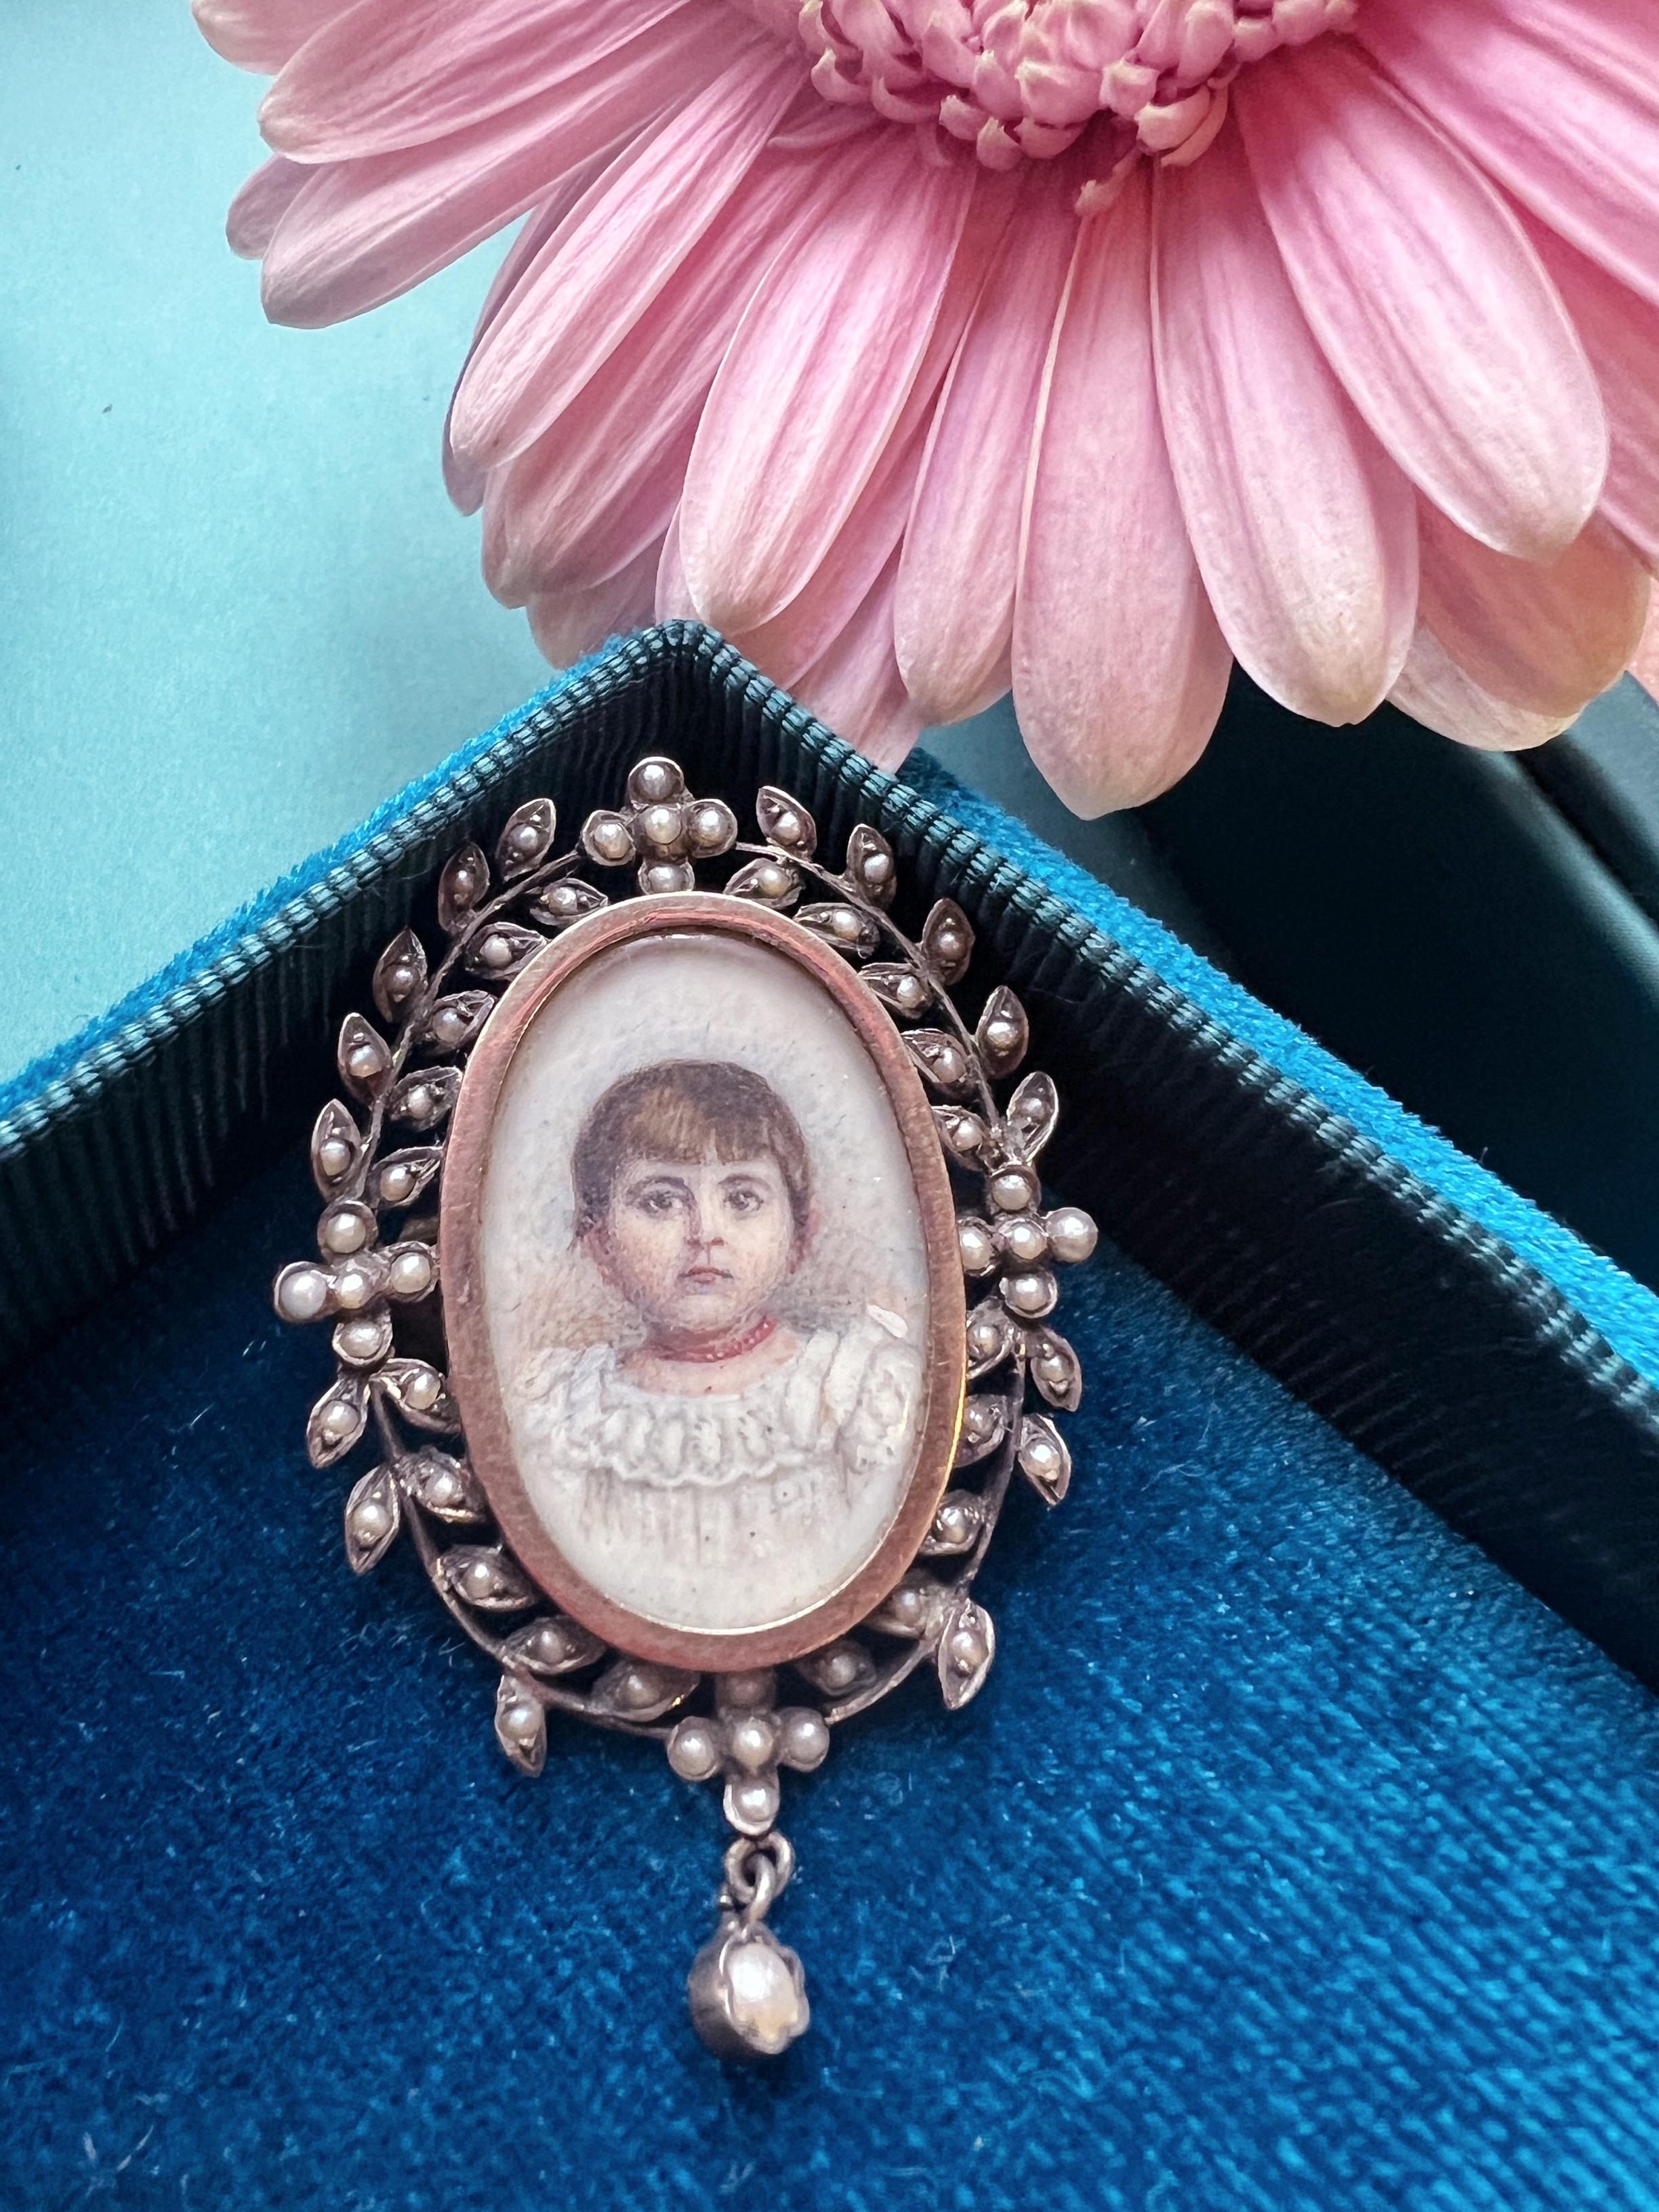 For sale a very sweet, Victorian era miniature portrait brooch.

The brooch features a young girl painted with a strand of red coral beads necklace. The painter paid great attention to draw the girl's white dress on which the beautiful red coral